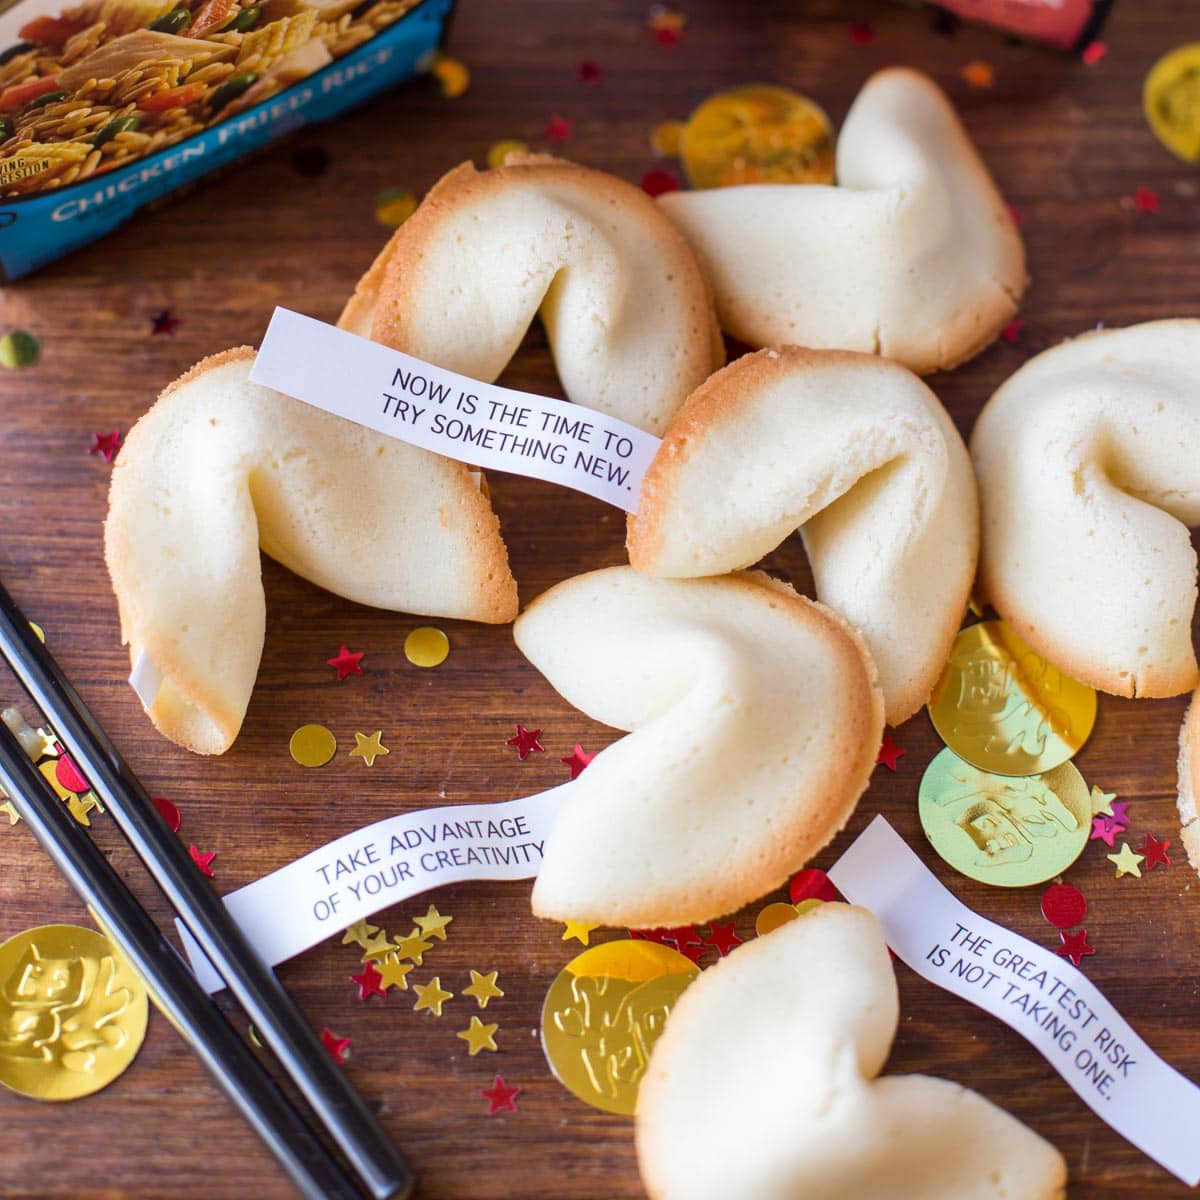 Homemade fortune cookies with fortunes inside